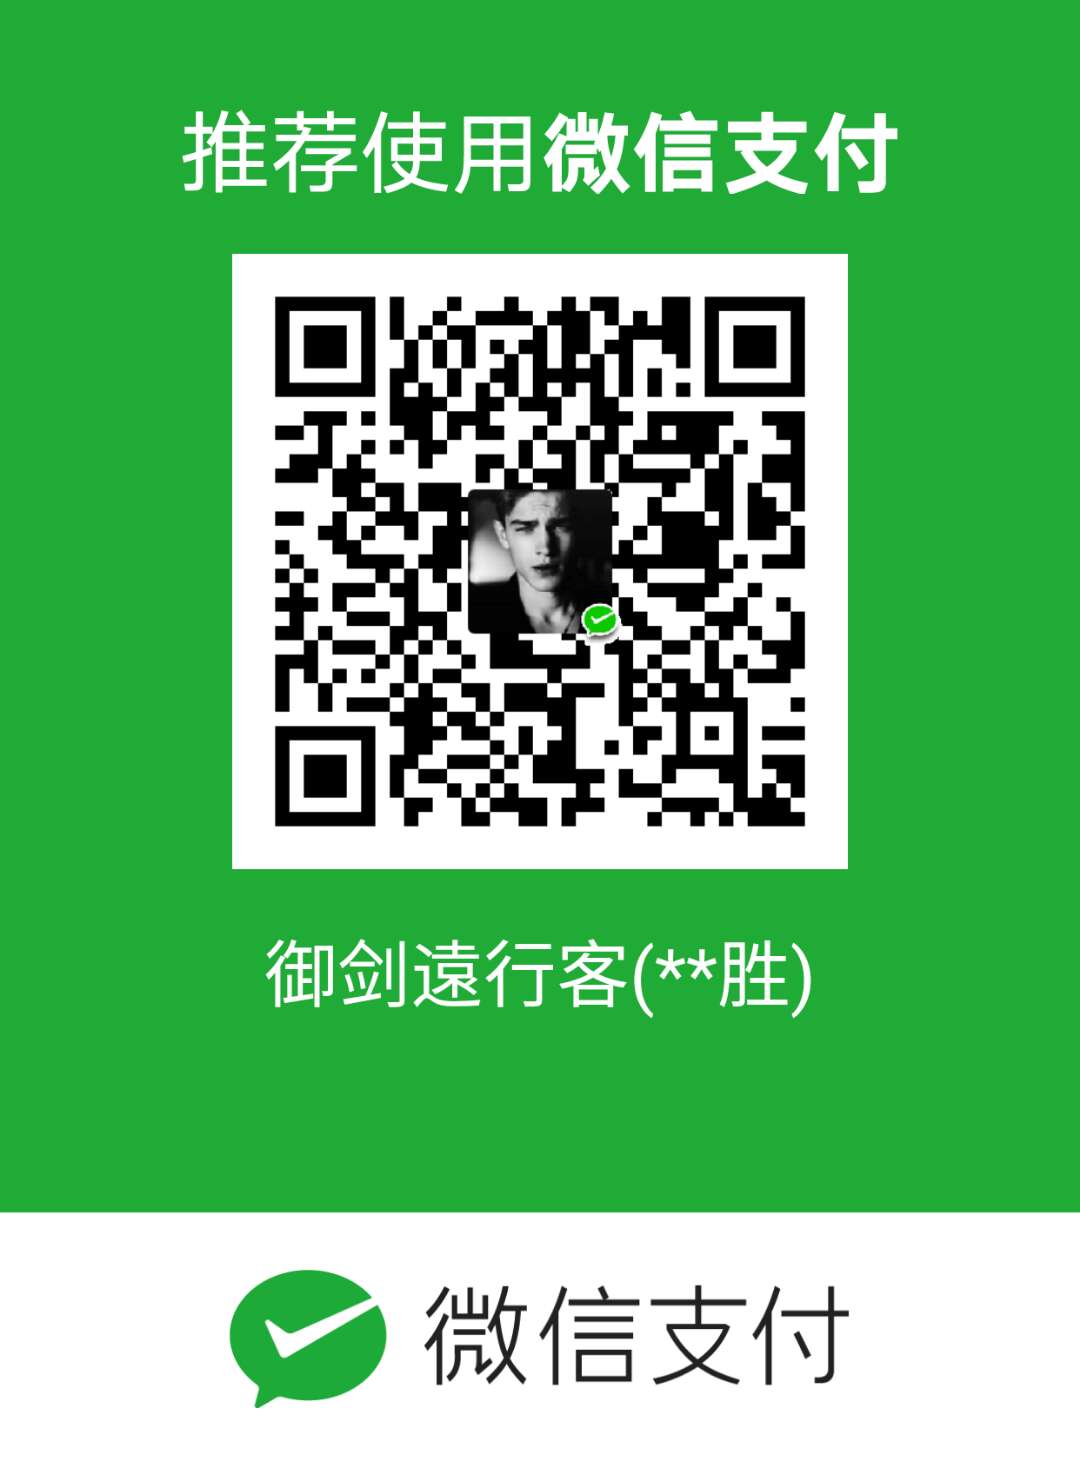 DongSheng WeChat Pay